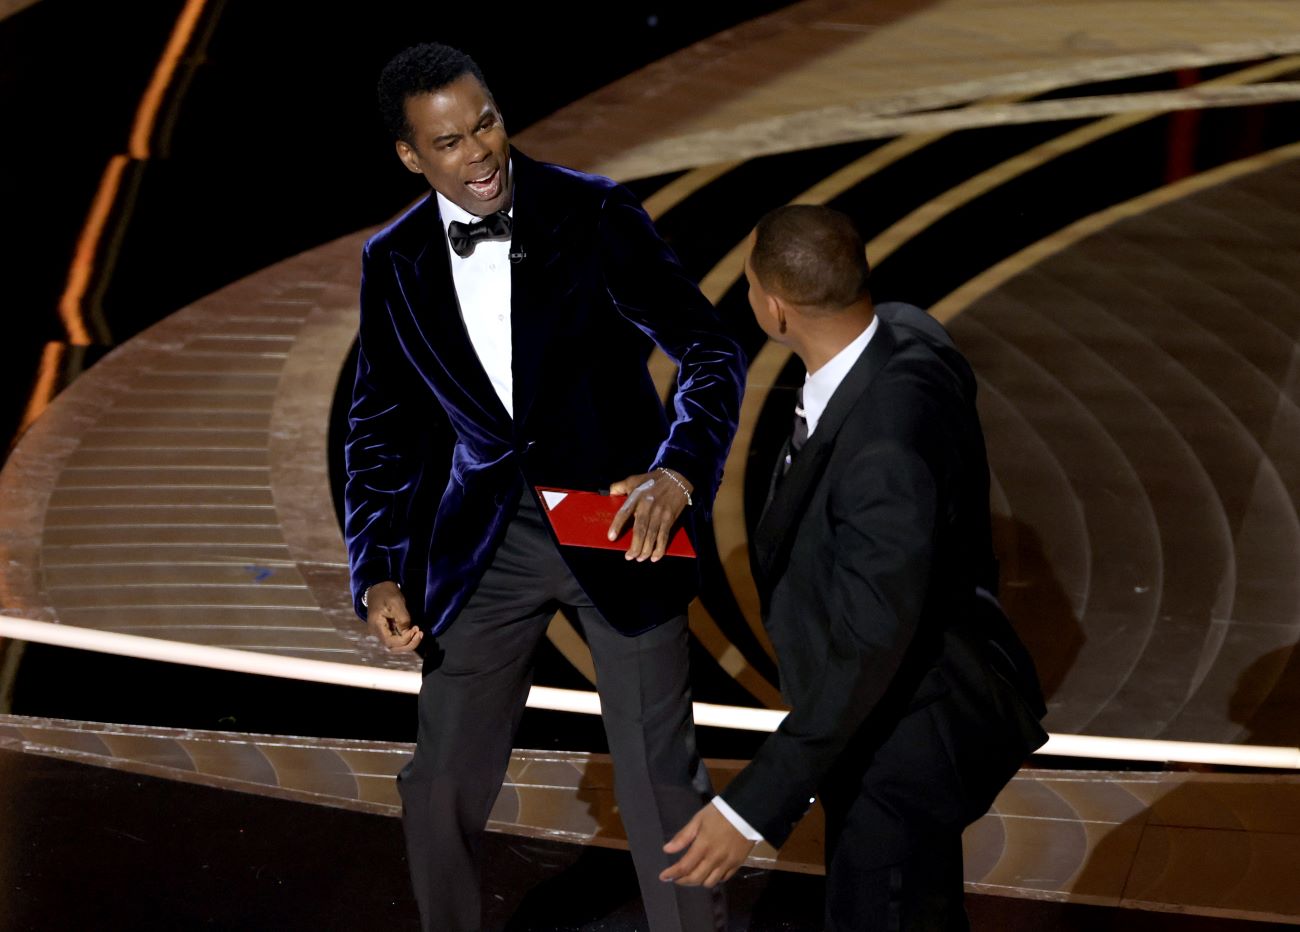 Chris Rock and Will Smith onstage at the Oscars. Chris Rock reacts to Will Smith hitting him.